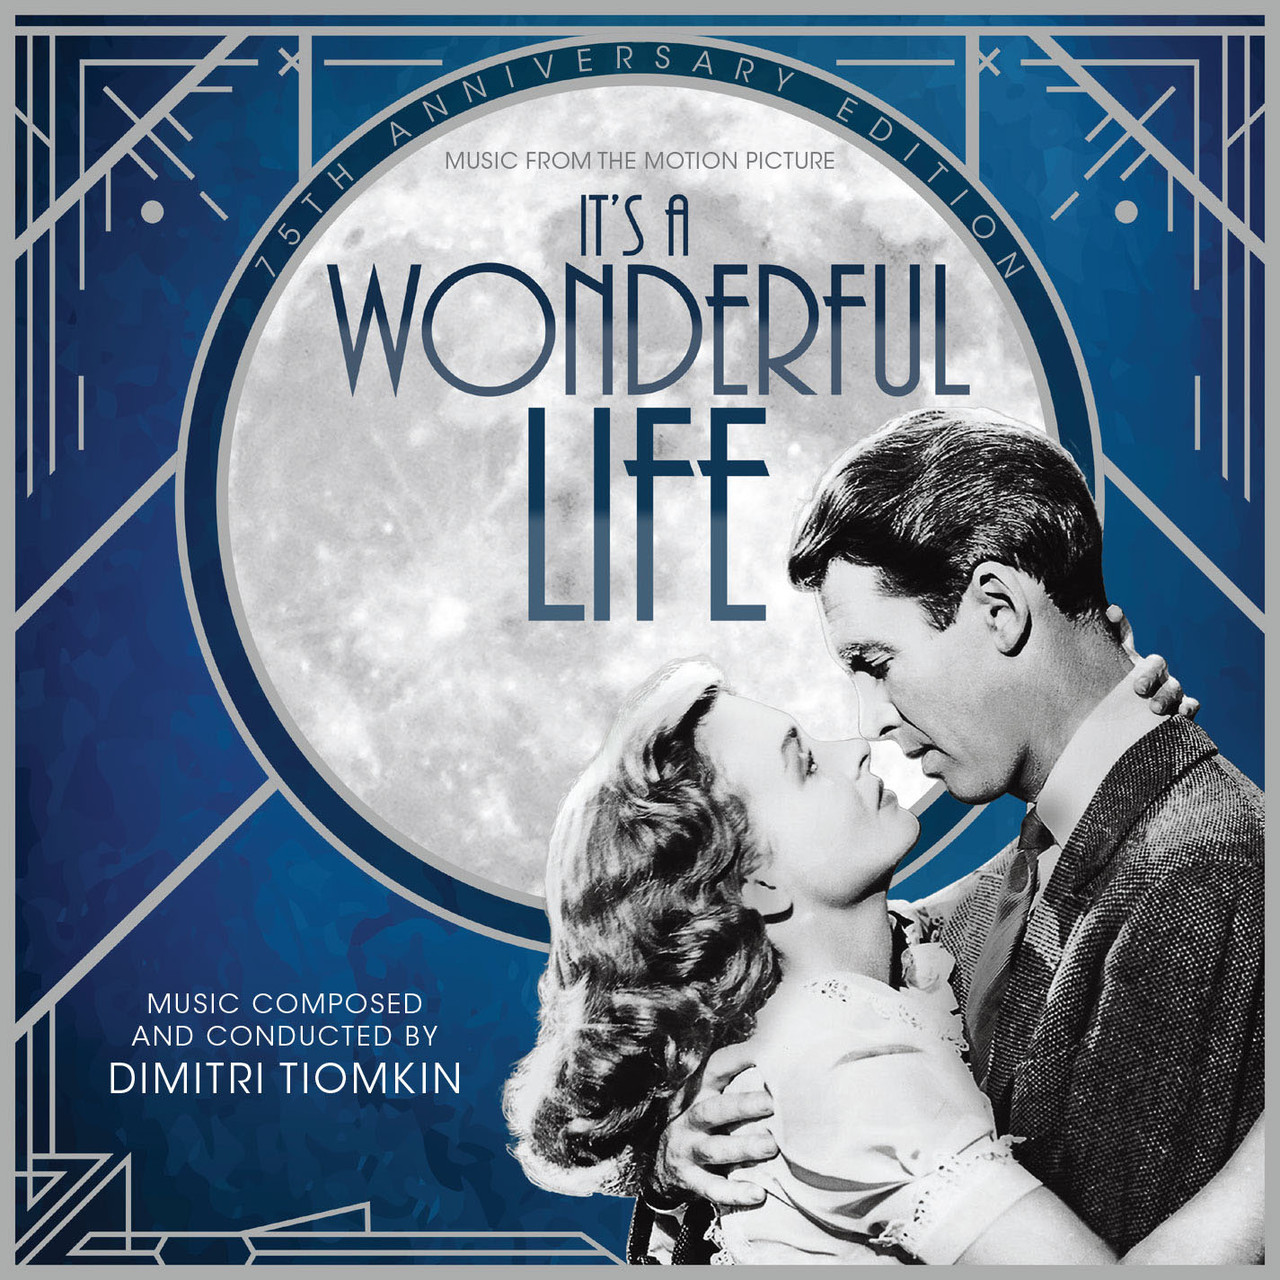 IT’S A WONDERFUL LIFE 75th ANNIVERSARY REMASTERED LIMITED EDITION